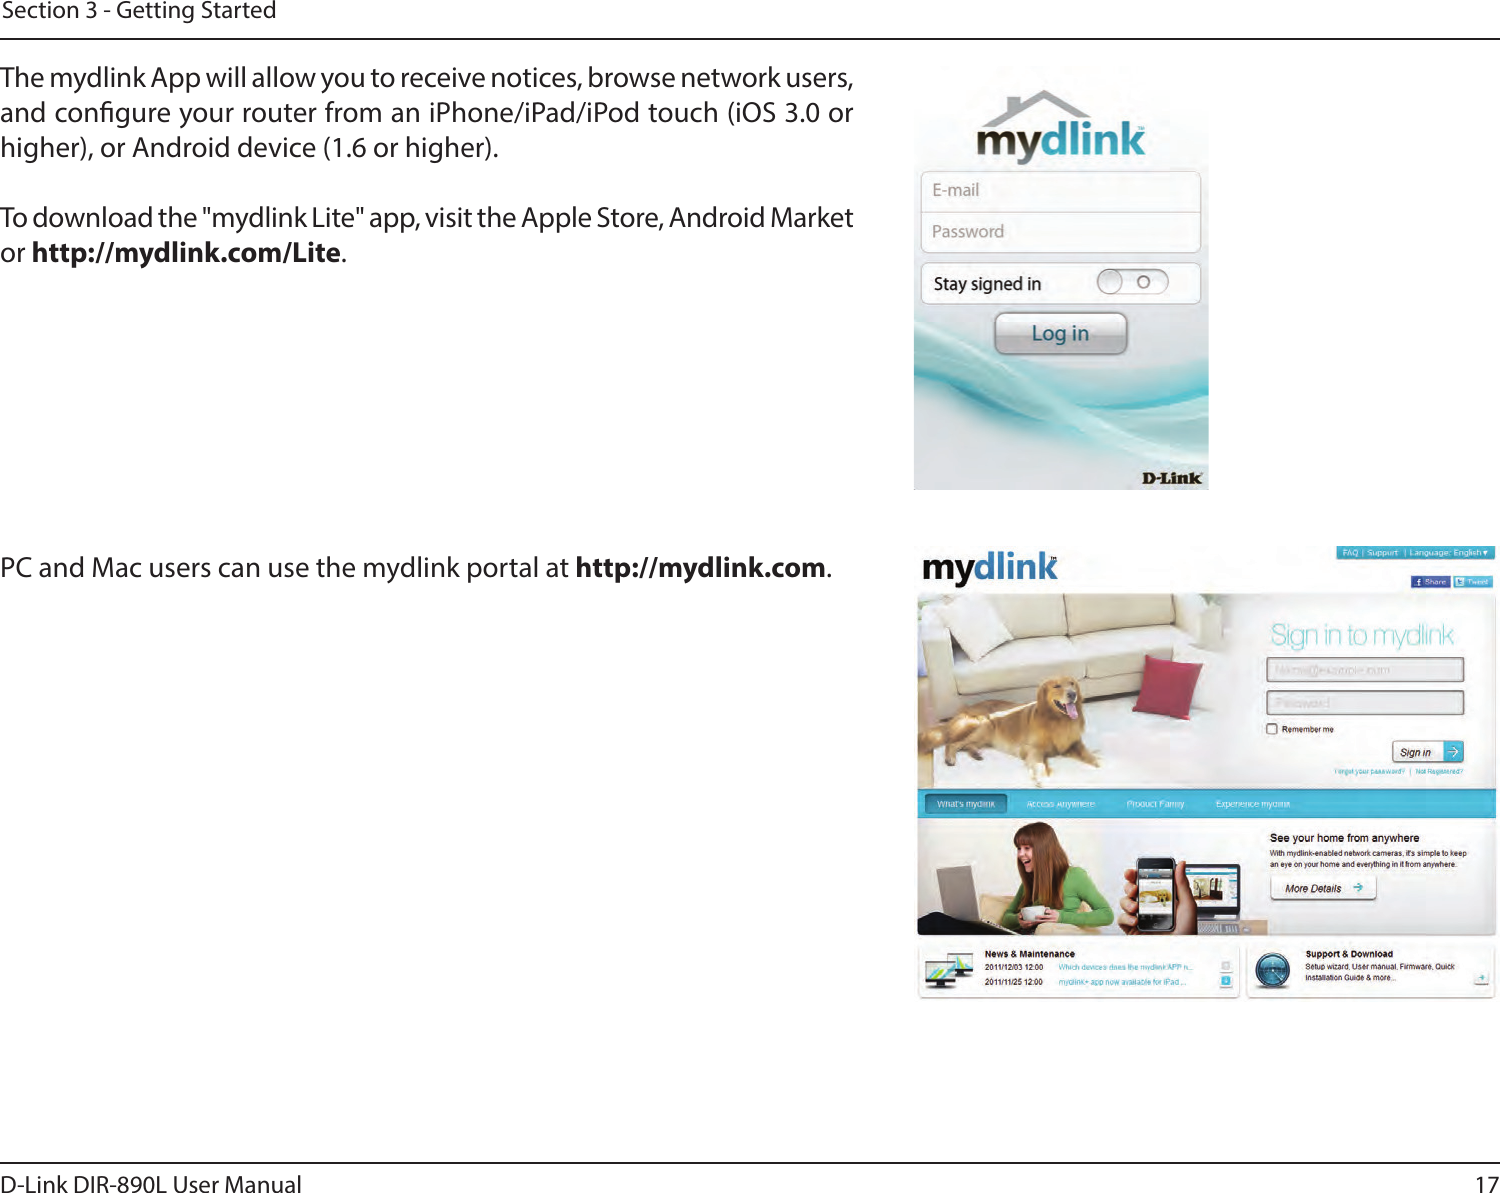 17D-Link DIR-890L User ManualSection 3 - Getting StartedThe mydlink App will allow you to receive notices, browse network users, and congure your router from an iPhone/iPad/iPod touch (iOS 3.0 or higher), or Android device (1.6 or higher).To download the &quot;mydlink Lite&quot; app, visit the Apple Store, Android Market or http://mydlink.com/Lite. PC and Mac users can use the mydlink portal at http://mydlink.com.